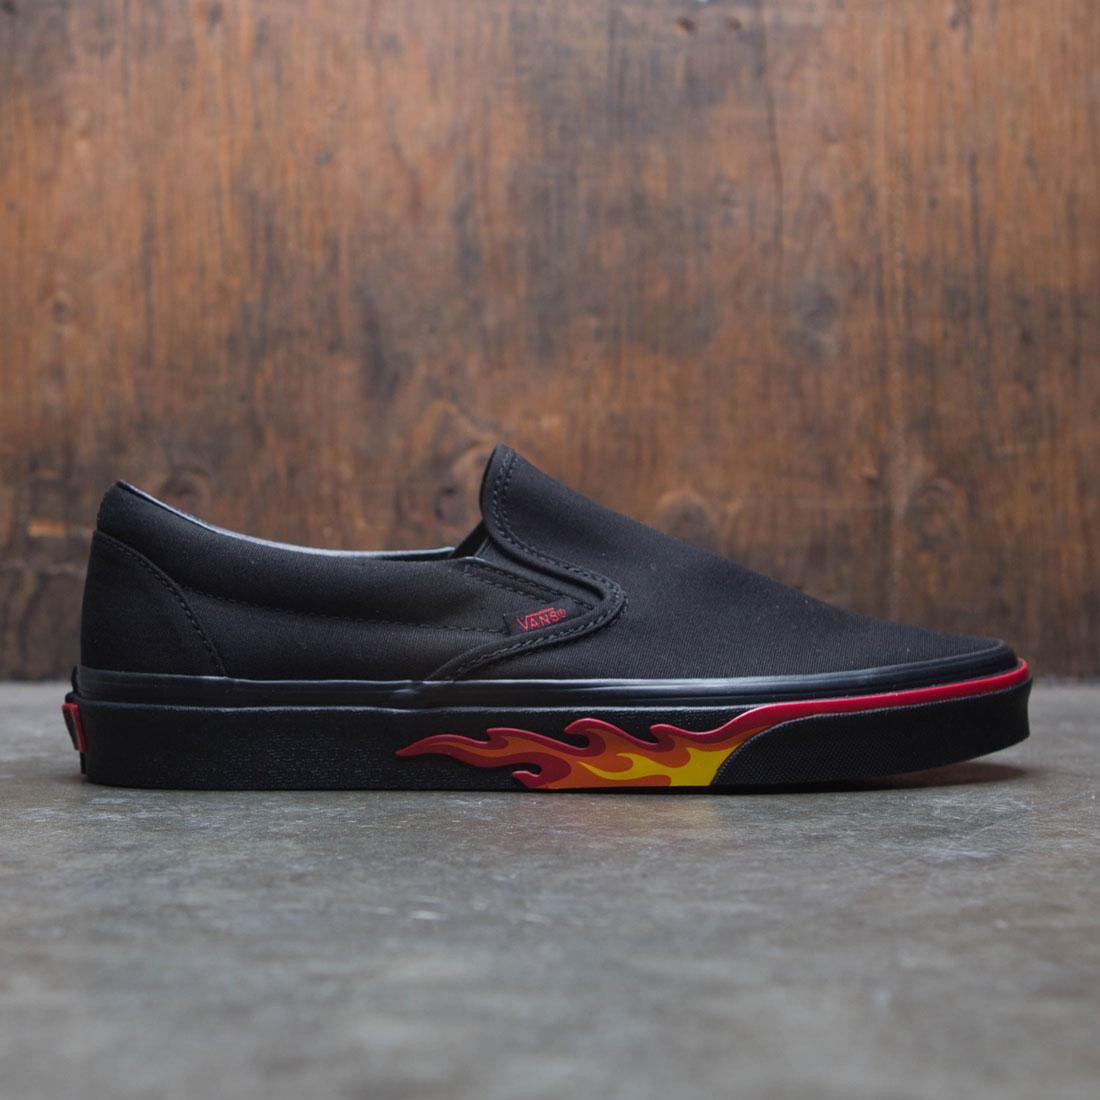 slip on vans with flames